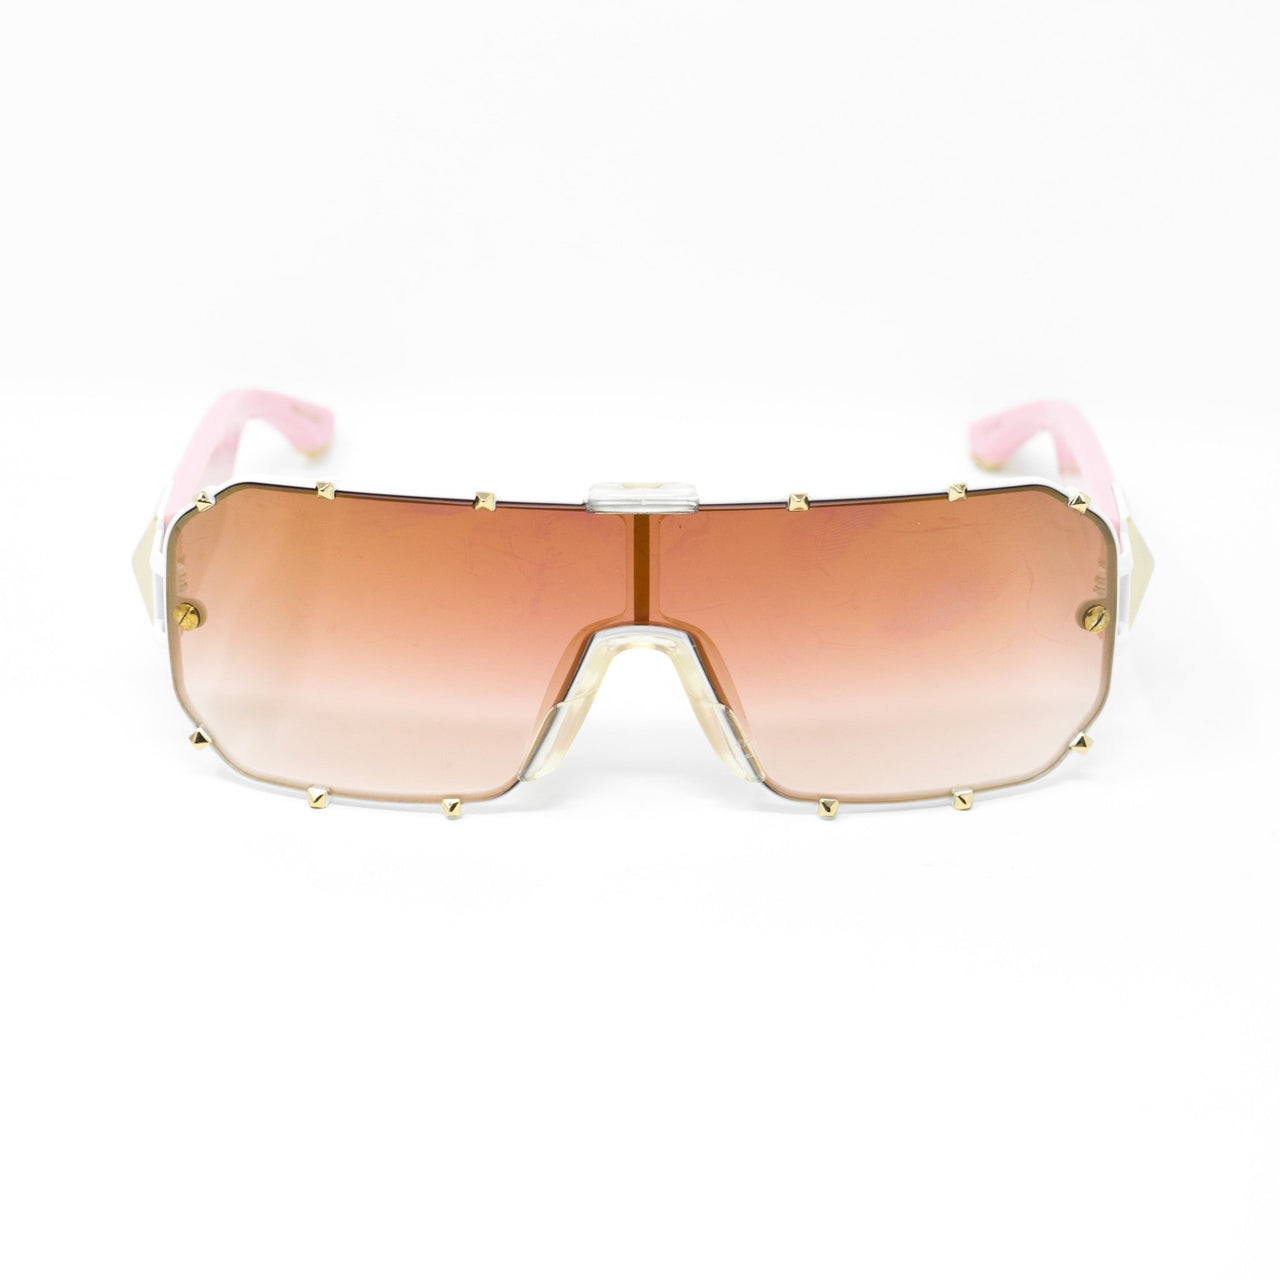 Giles Deacon Sunglasses Shield Pink/White Gold With Category 3 Gold Mirror Graduated Lenses 9GILES1C5PINK - Watches & Crystals